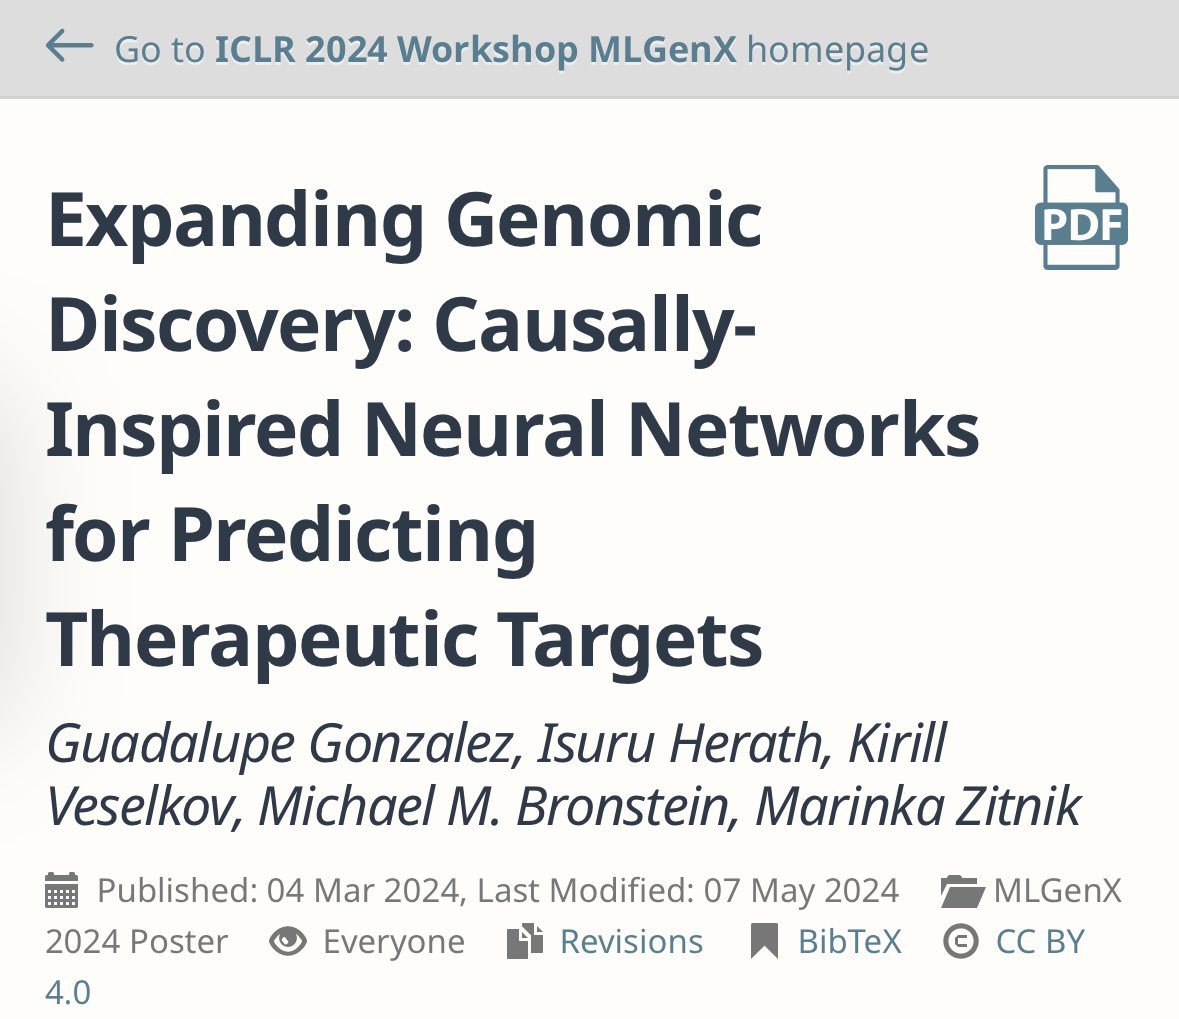 Join me on Sat 12-2pm at the @MLGenX poster session to talk about PDGrapher, our work on predicting therapeutic perturbations: openreview.net/forum?id=Zcw2O… I’m at #ICLR2024 Thurs to Sat - reach out to talk (graph) ML + Bio or about our @PrescientDesign team!